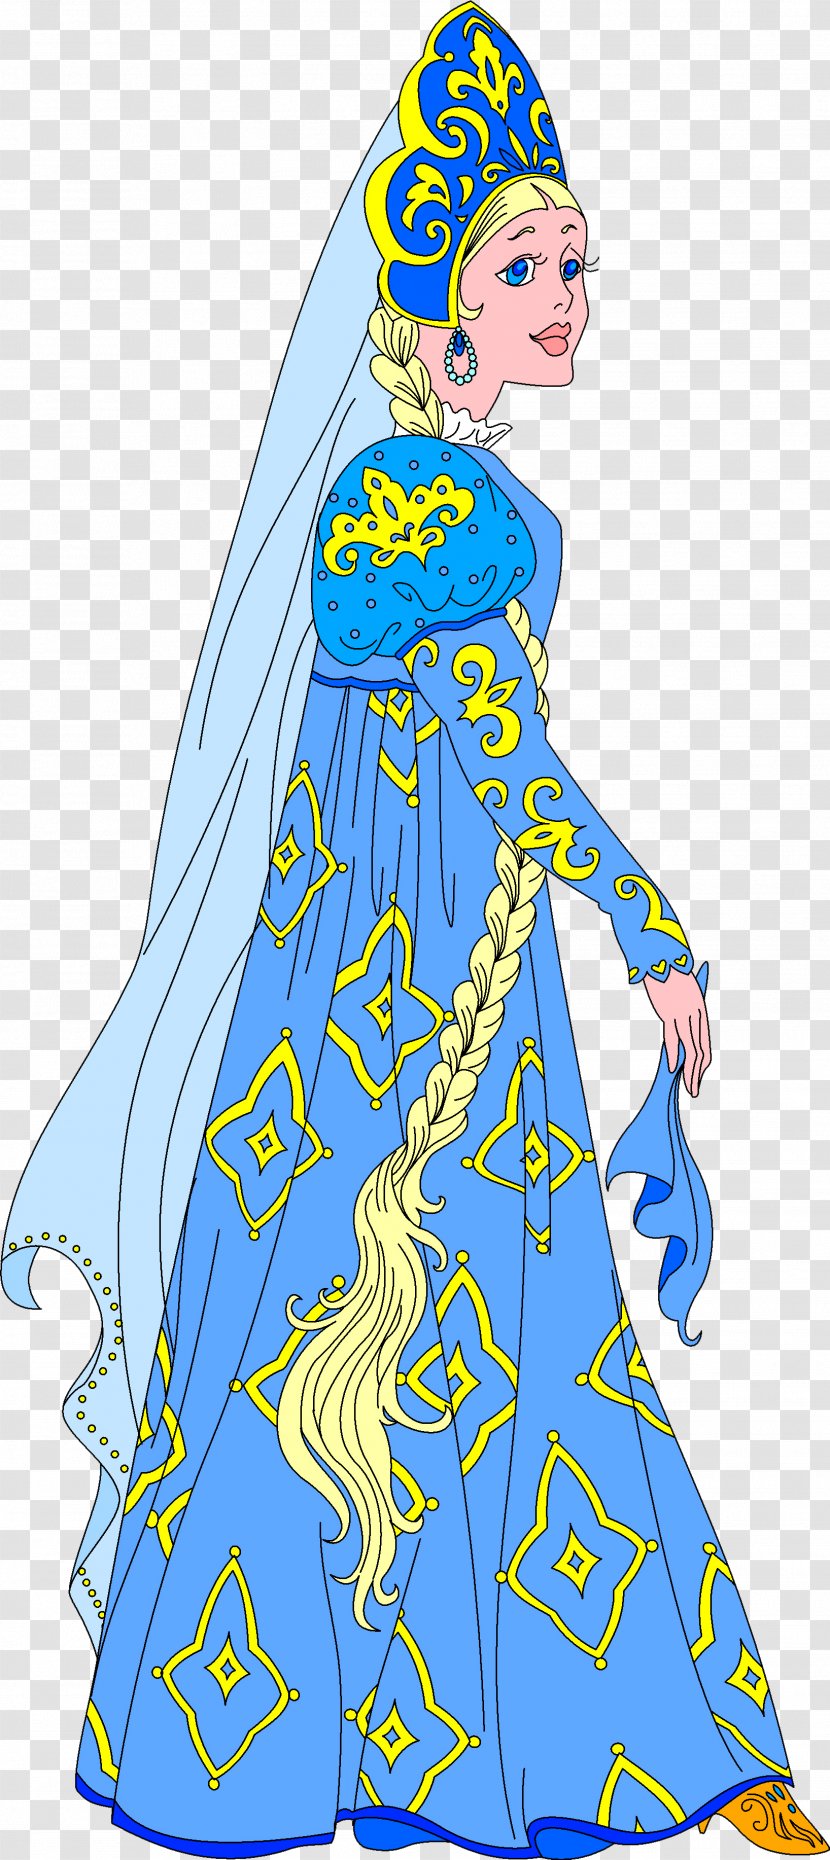 Fairy Tale Hero The Of Dead Princess And Seven Knights Adventures Dunno His Friends Author - Fictional Character Transparent PNG